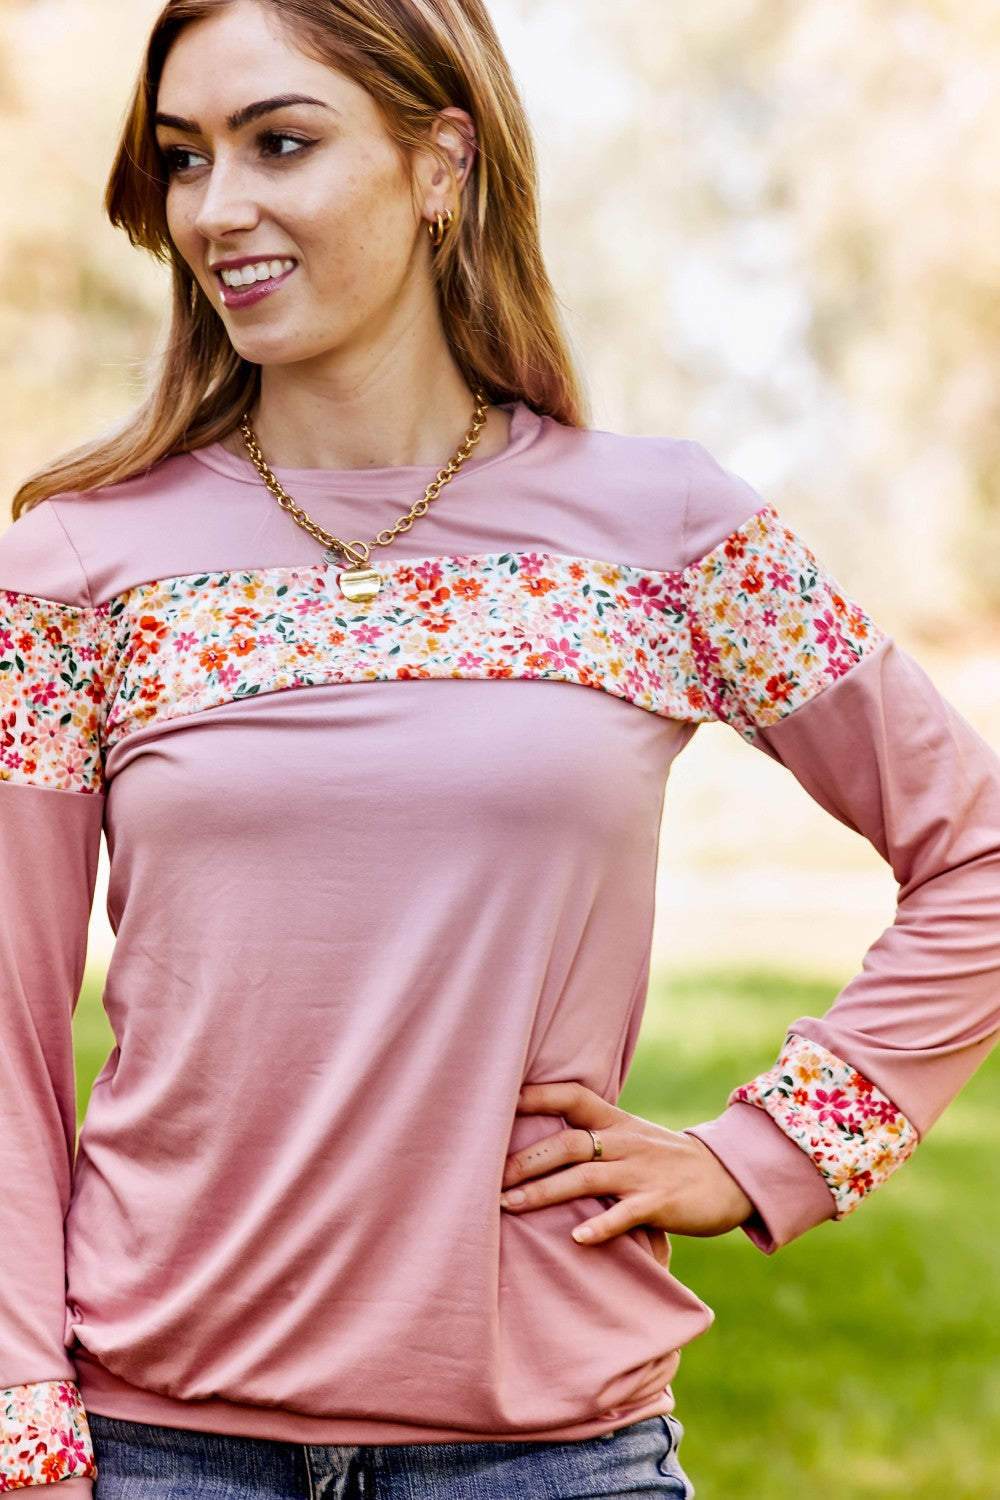 Acting Pro Floral Bloom Full Size Floral Contrast Top